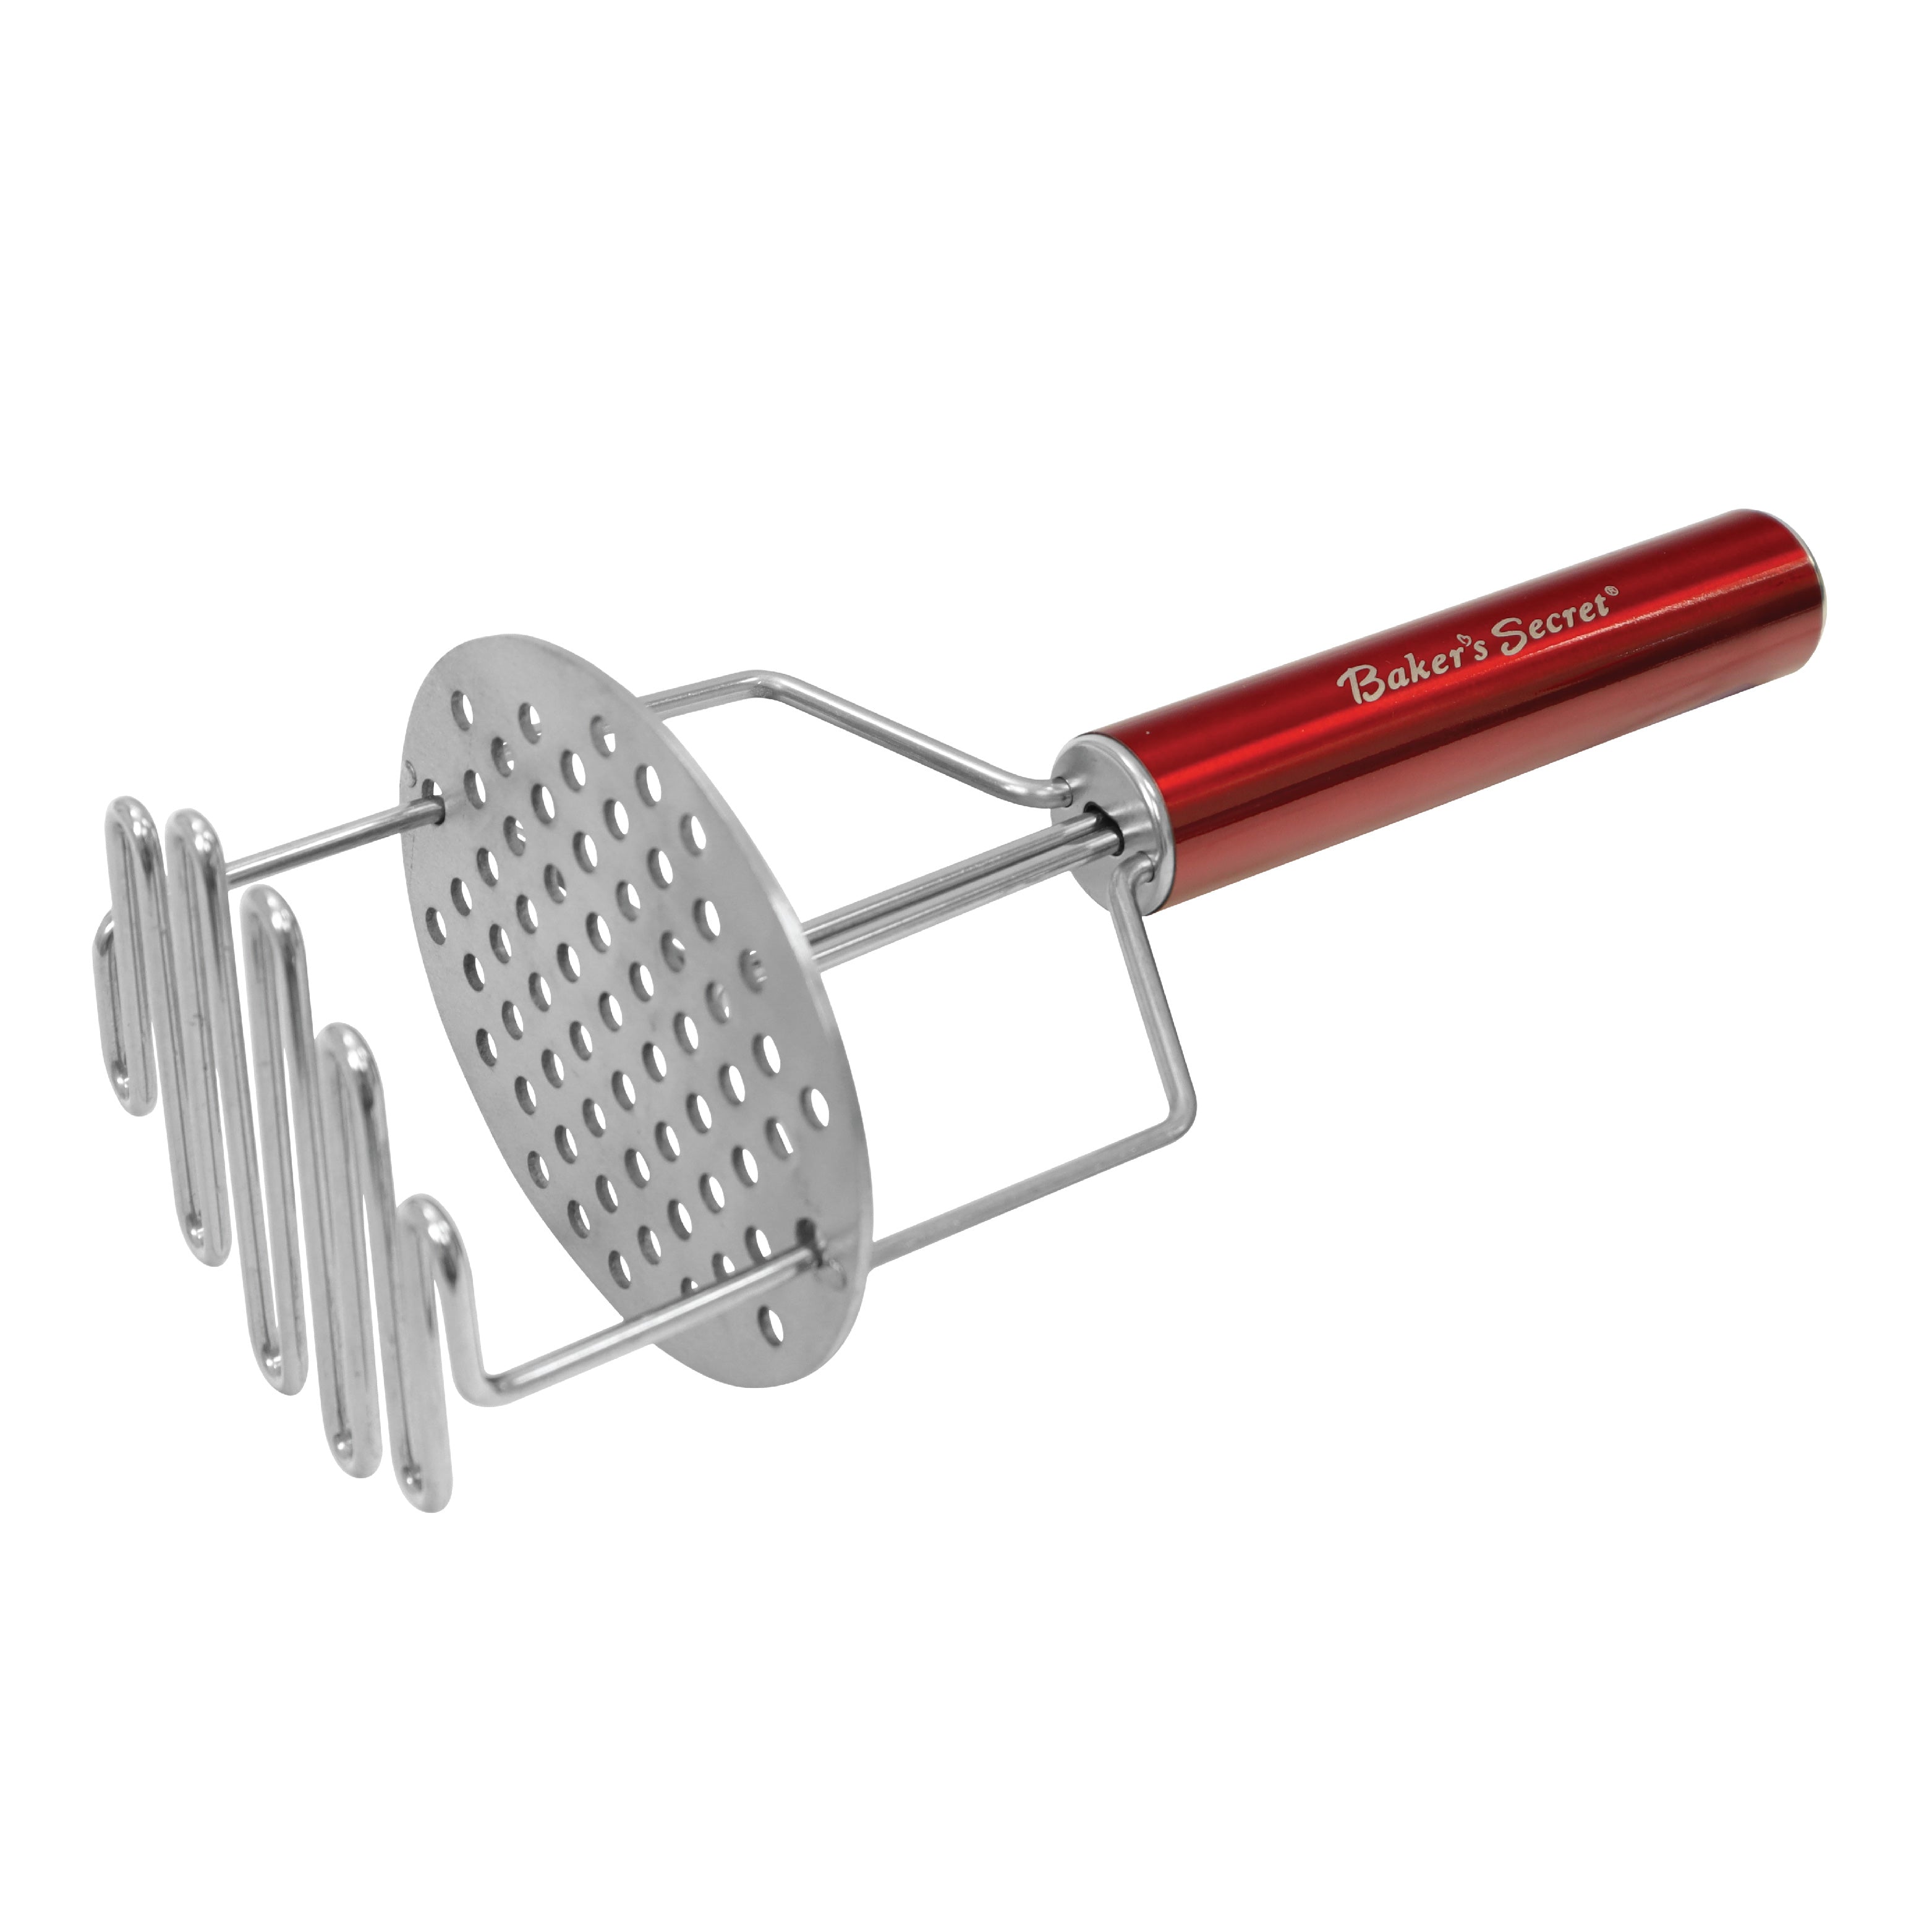 Stainless Steel Potato Masher with handle - KritKart